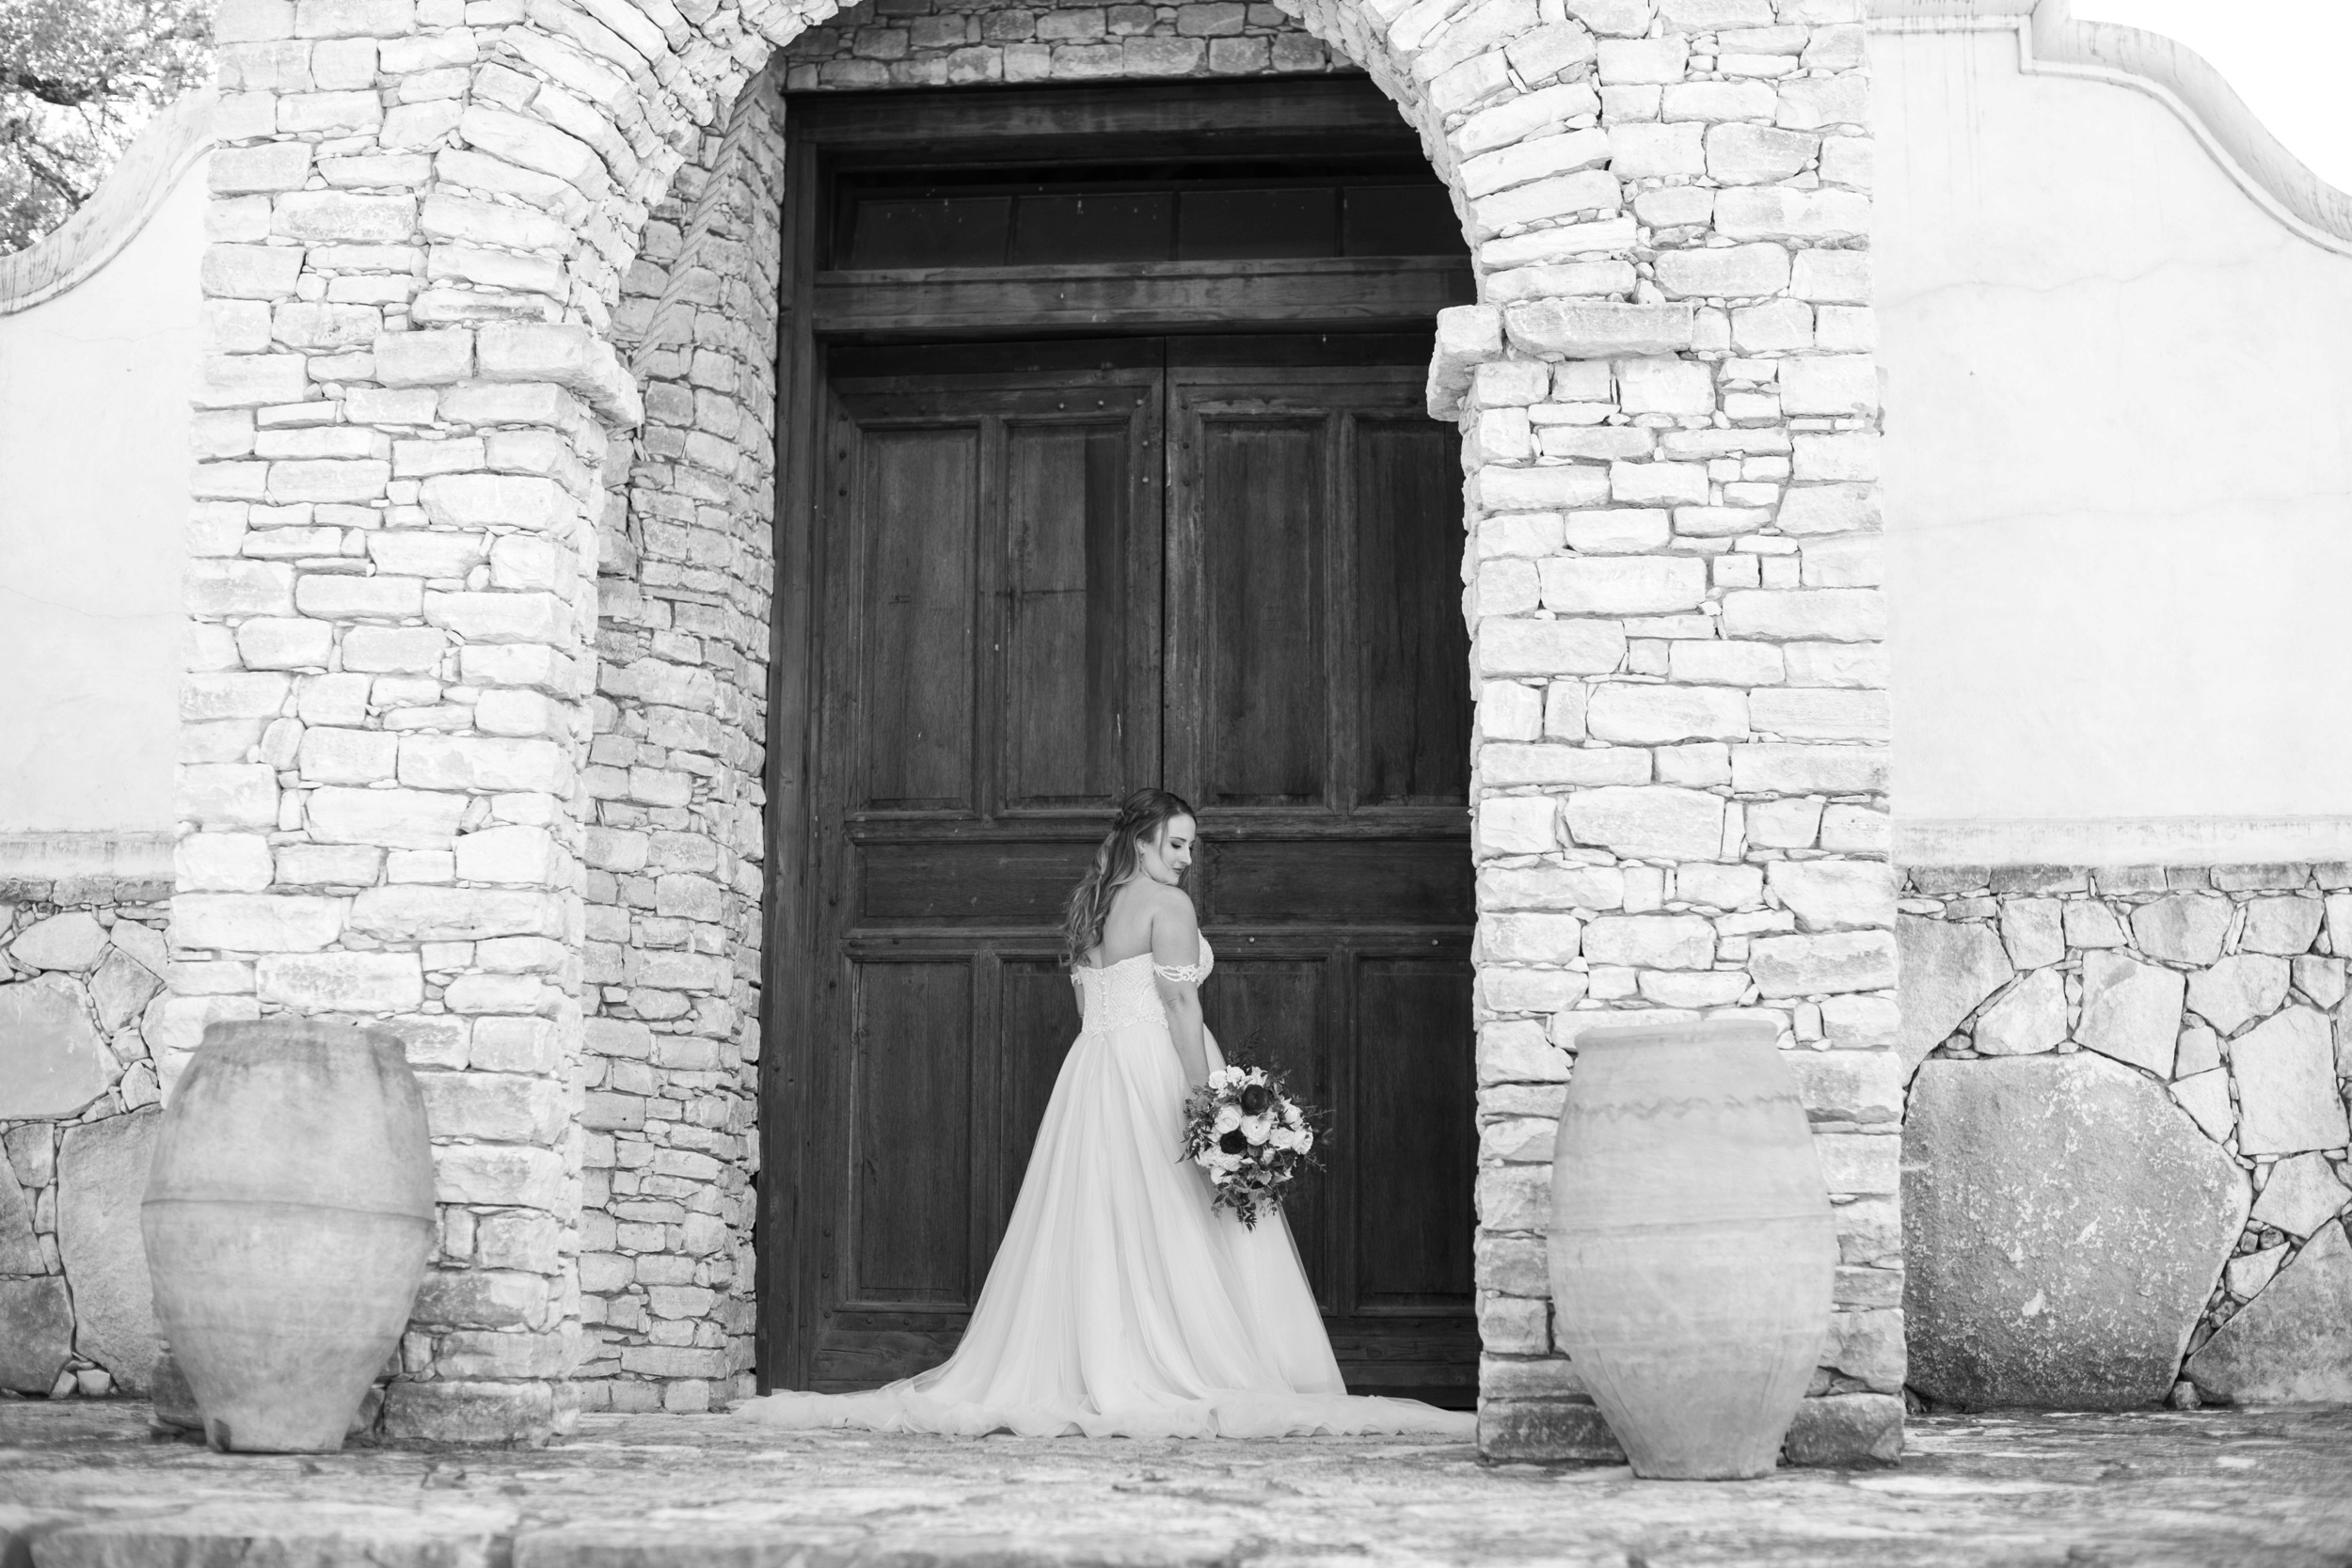 Where to take bridal portraits in Dripping Springs